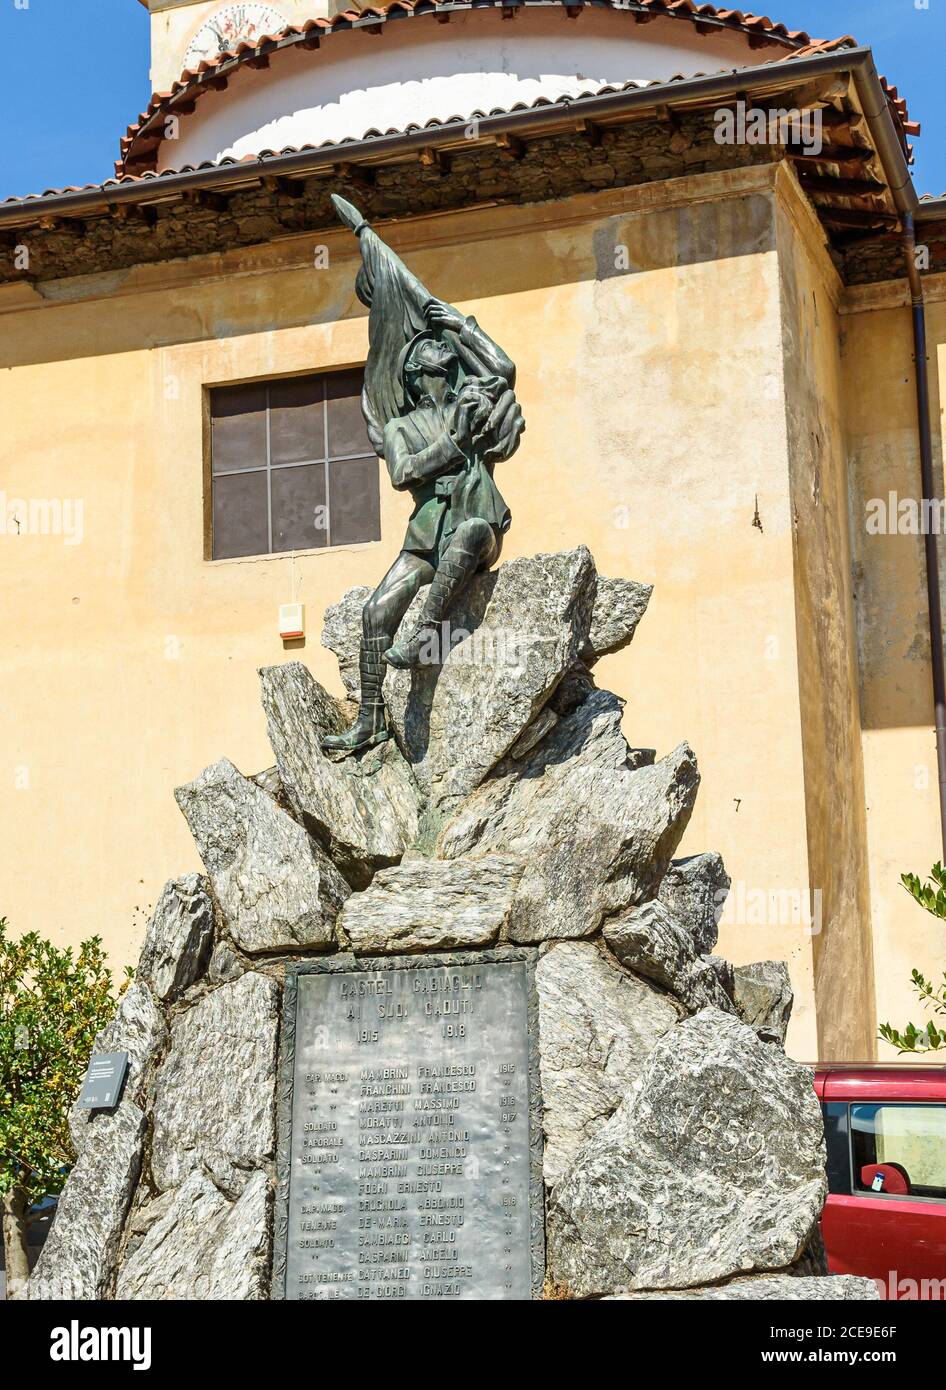 Monument to the Fallen in Castello Cabiaglio village, province of Varese, Lombardy, Italy Stock Photo